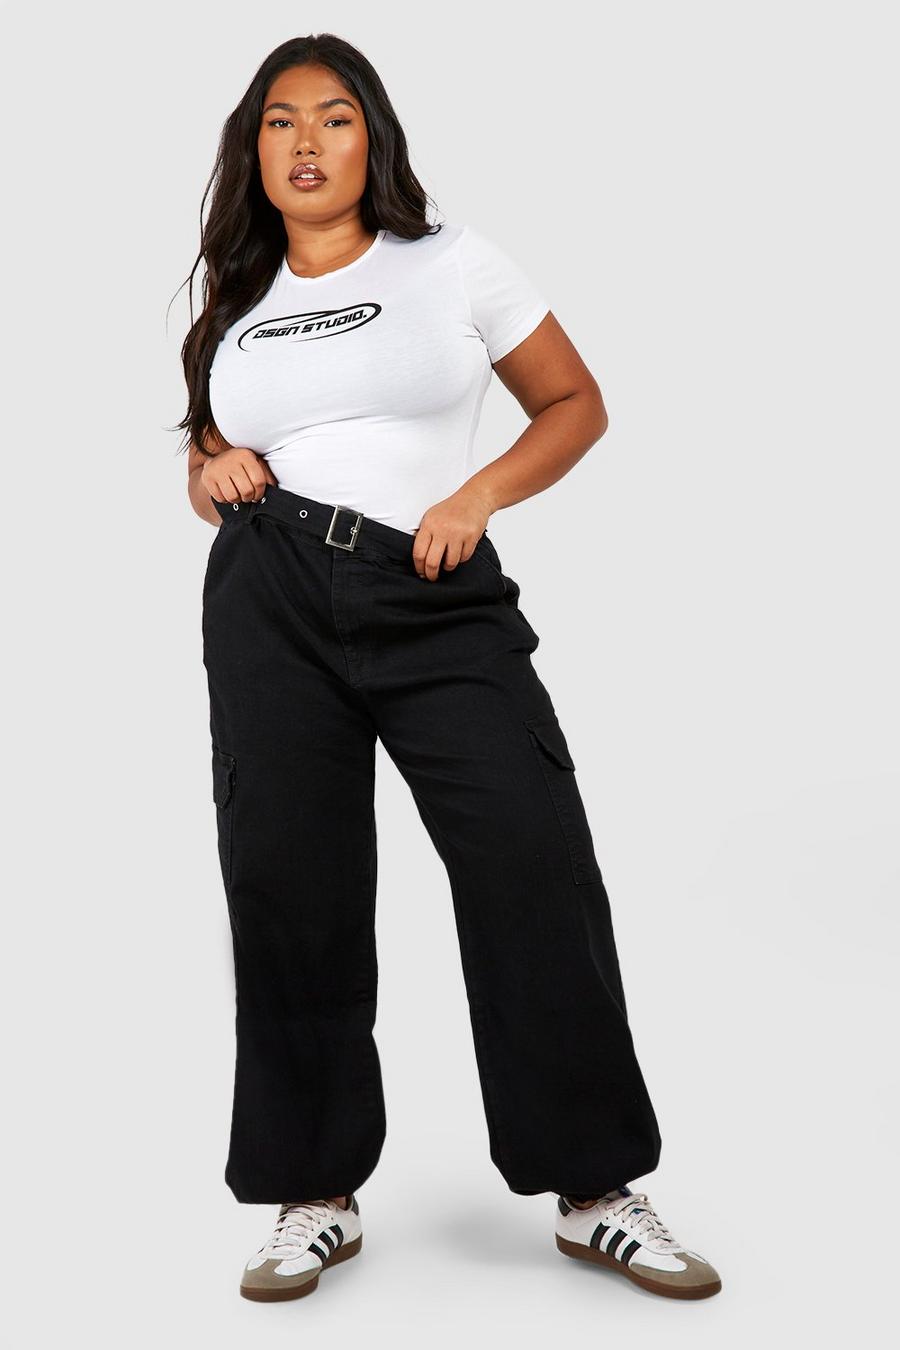 Buy U R YOU Plus Size Women's Black Solid Joggers With Pockets